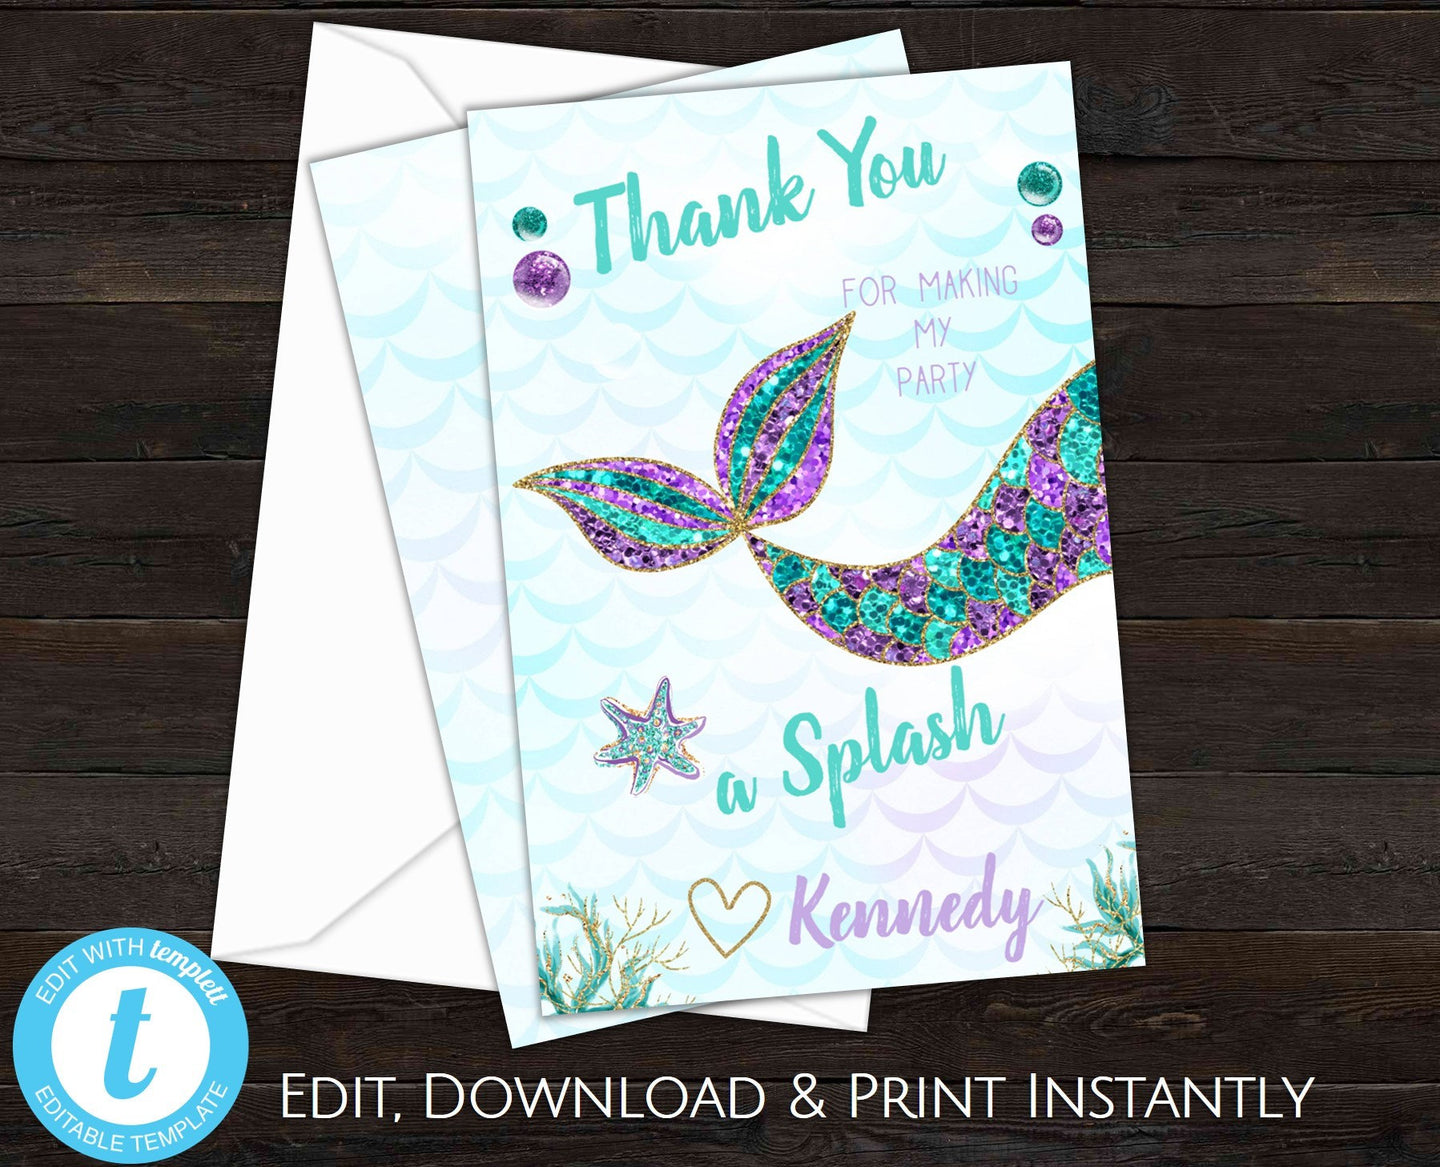 Mermaid Thank You Cards, Mermaid Party, Under The Sea Thank You Cards, Mermaid Birthday Thank You, Editable Thank You Card, Instant Download